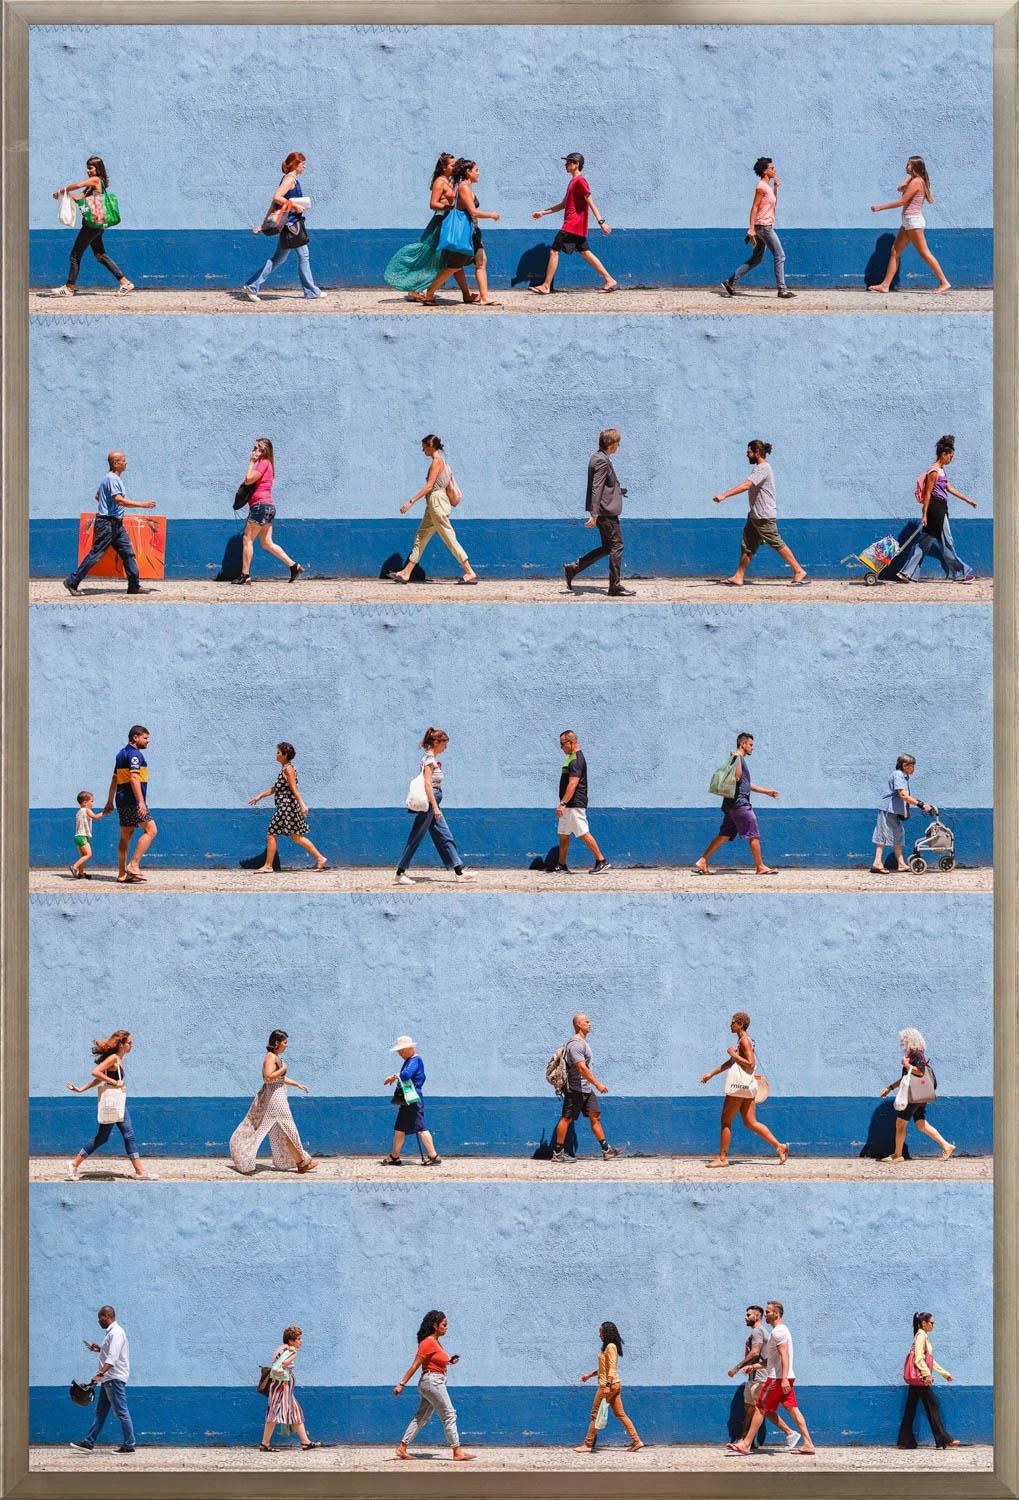 "Copacabana, Rio de Janeiro" is a framed photograph on paper by Xan Padron, depicting a compilation of walking figures set against a striped blue architectural background. Padron's signature technique of splicing together individual photographs to